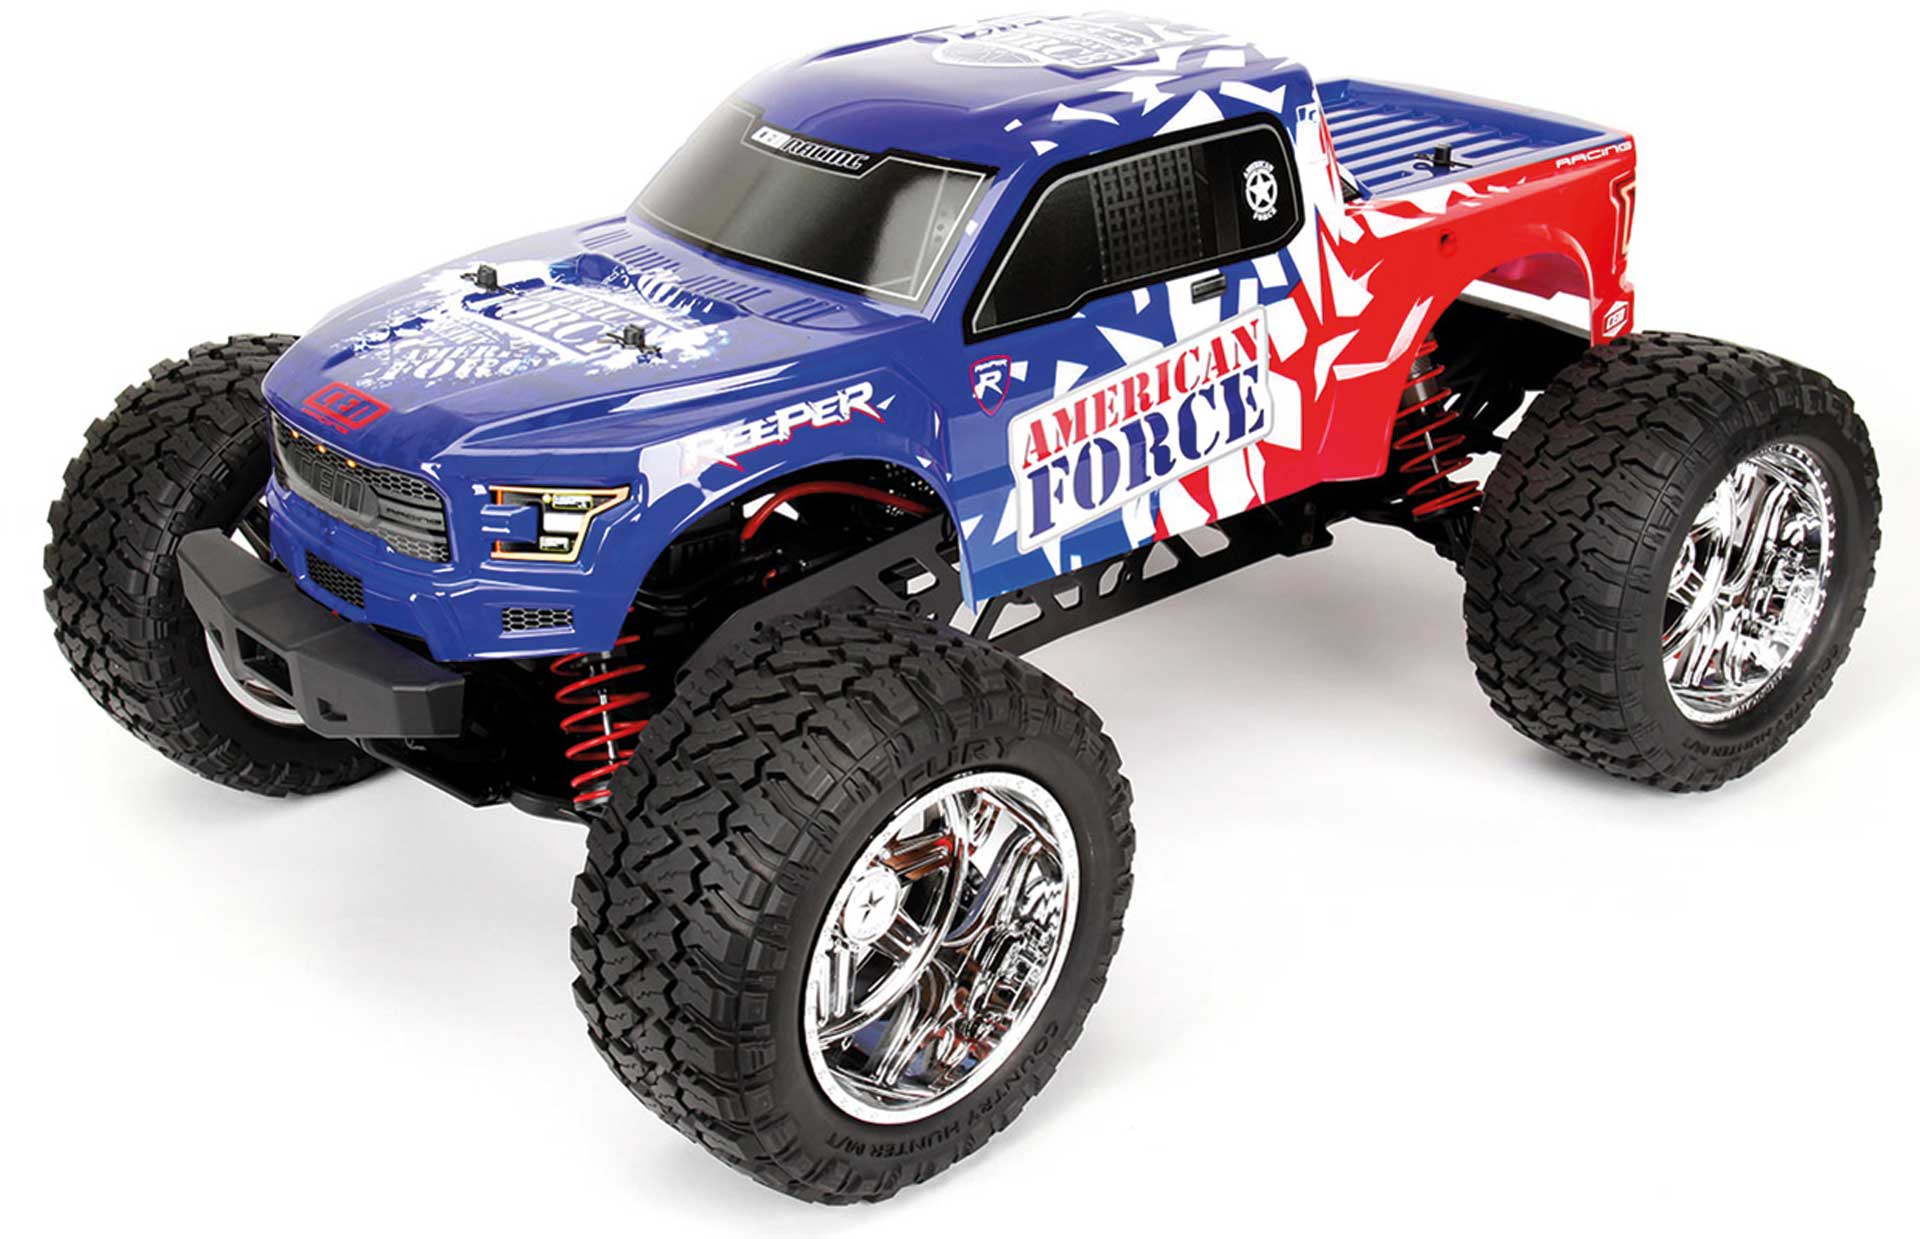 CEN REEPER AMERICAN FORCE EDITION 1/7 RTR BRUSHLESS